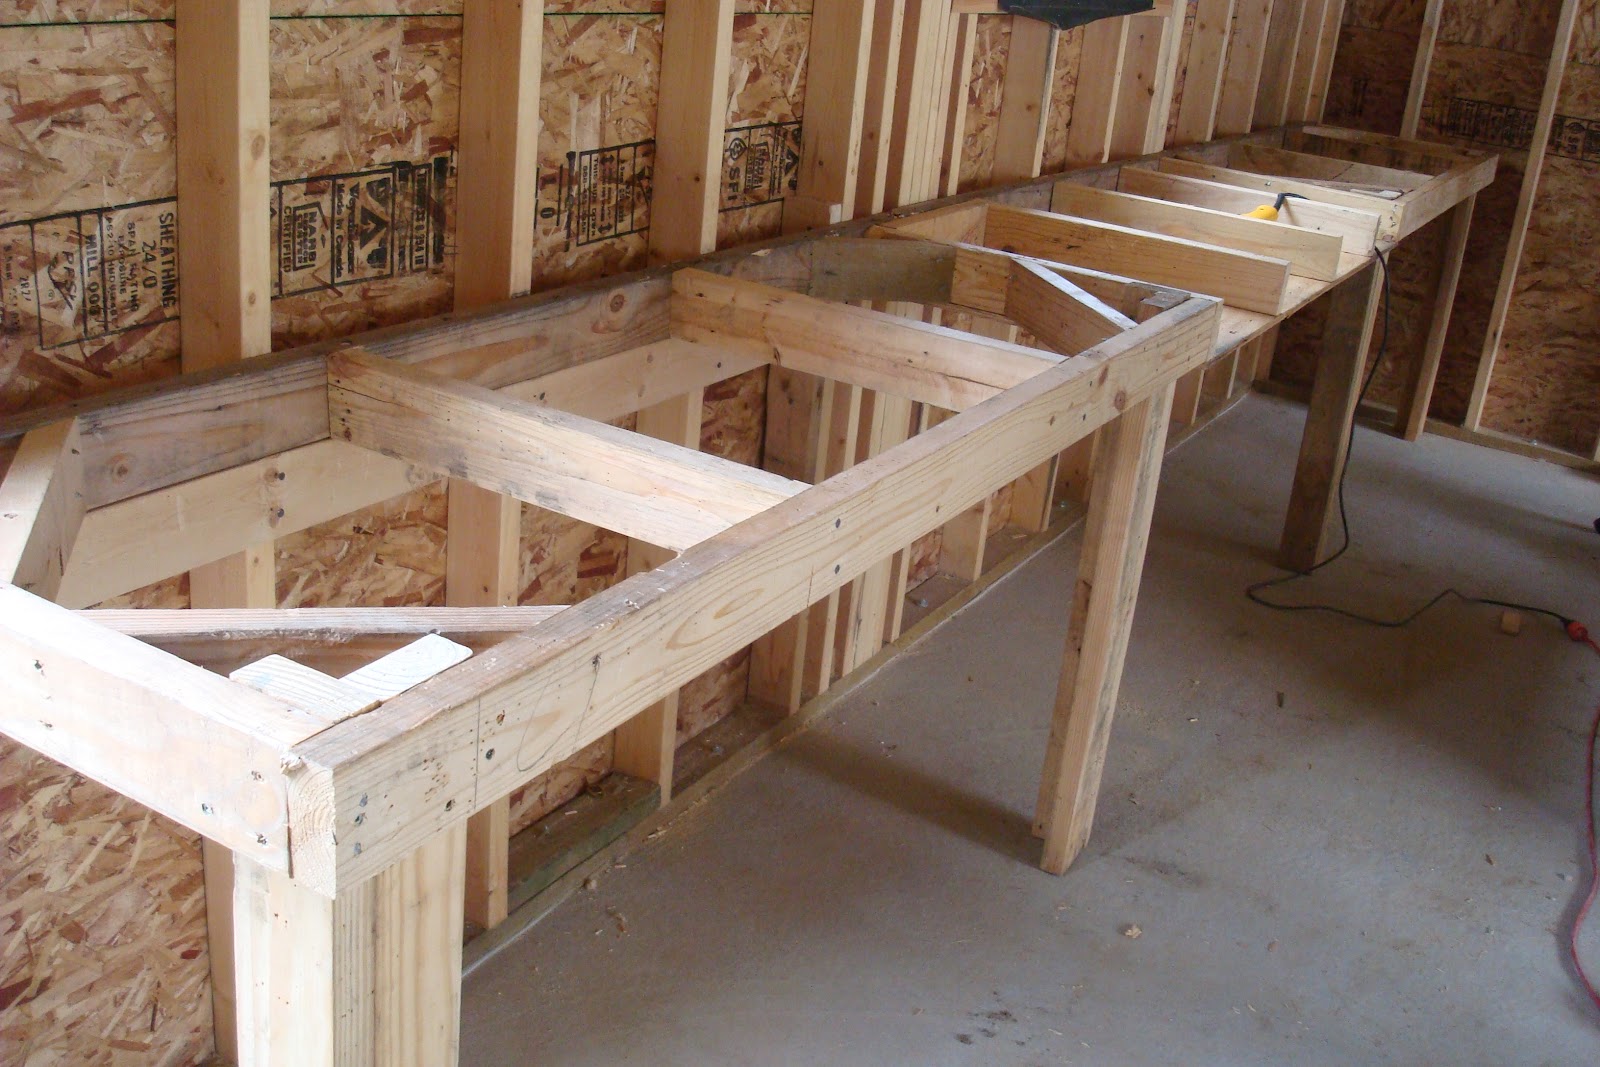 Woodworking building workbench on wall PDF Free Download